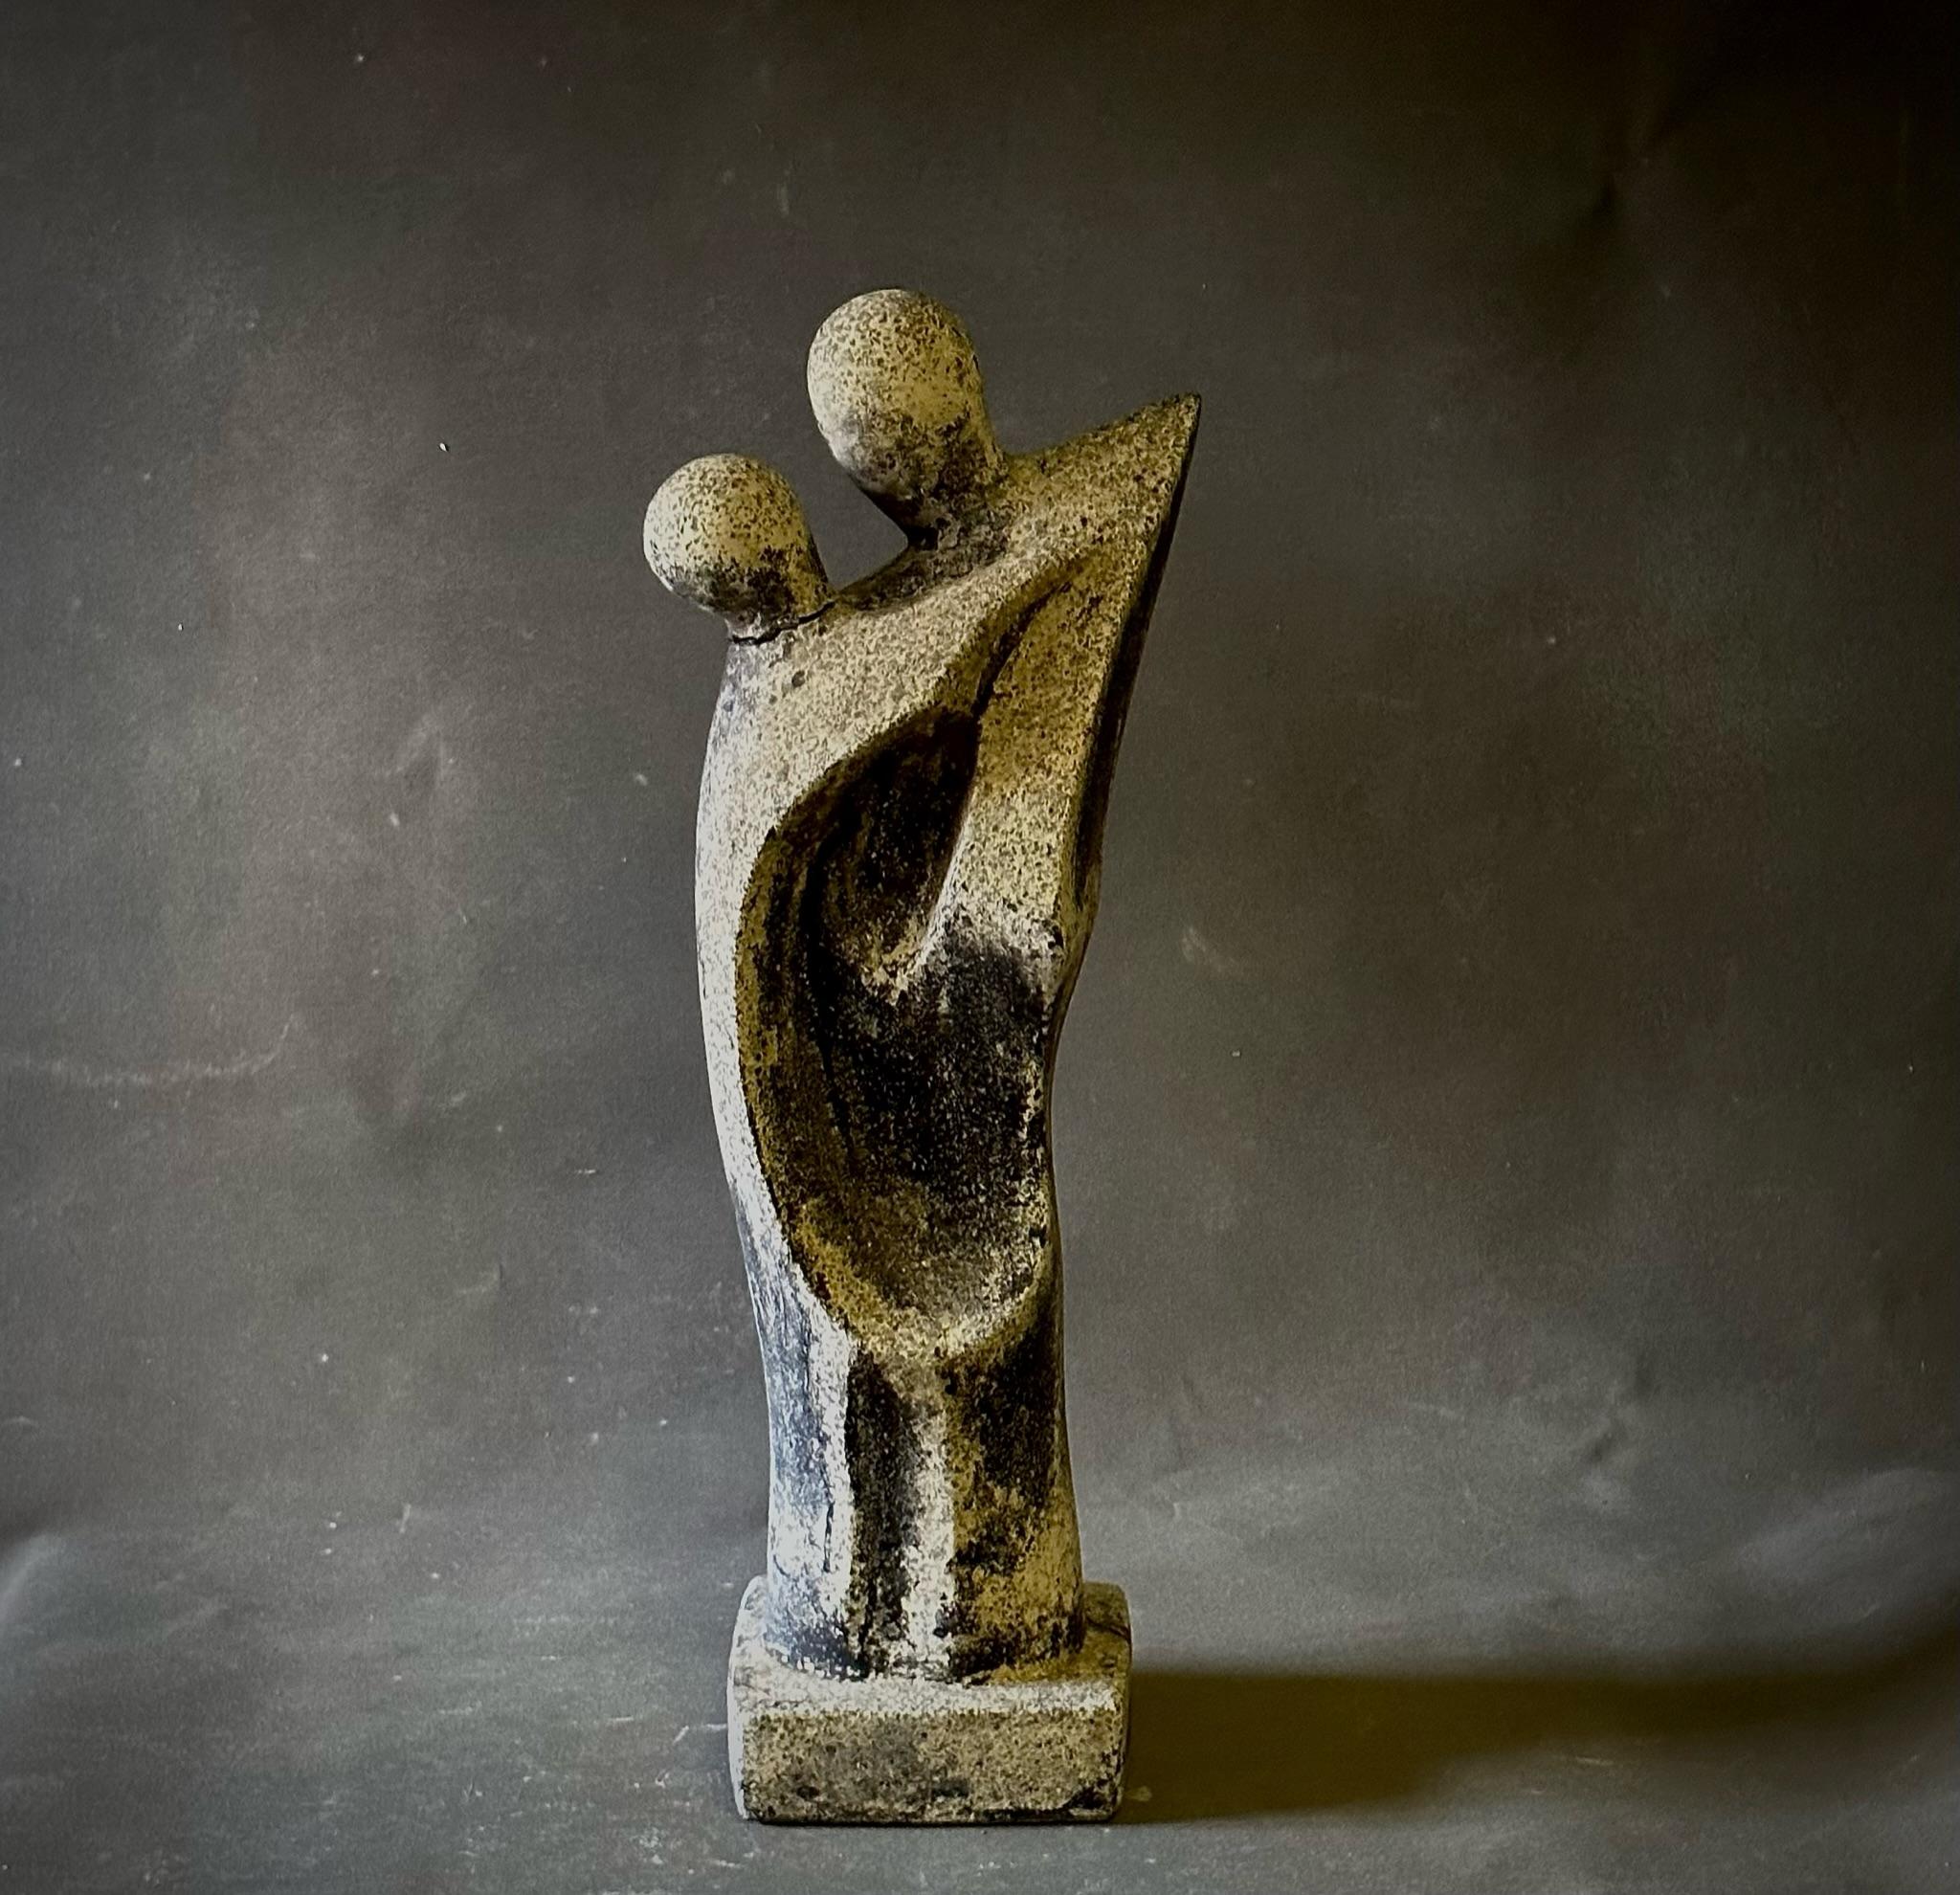 French midcentury carved stone sculpture depicting two figures abstractly rendered in embrace. Strikingly intimate for all its declination towards the anonymous and universal. A powerful, dynamic piece. 

France, circa 1960

Dimensions: 9 W x